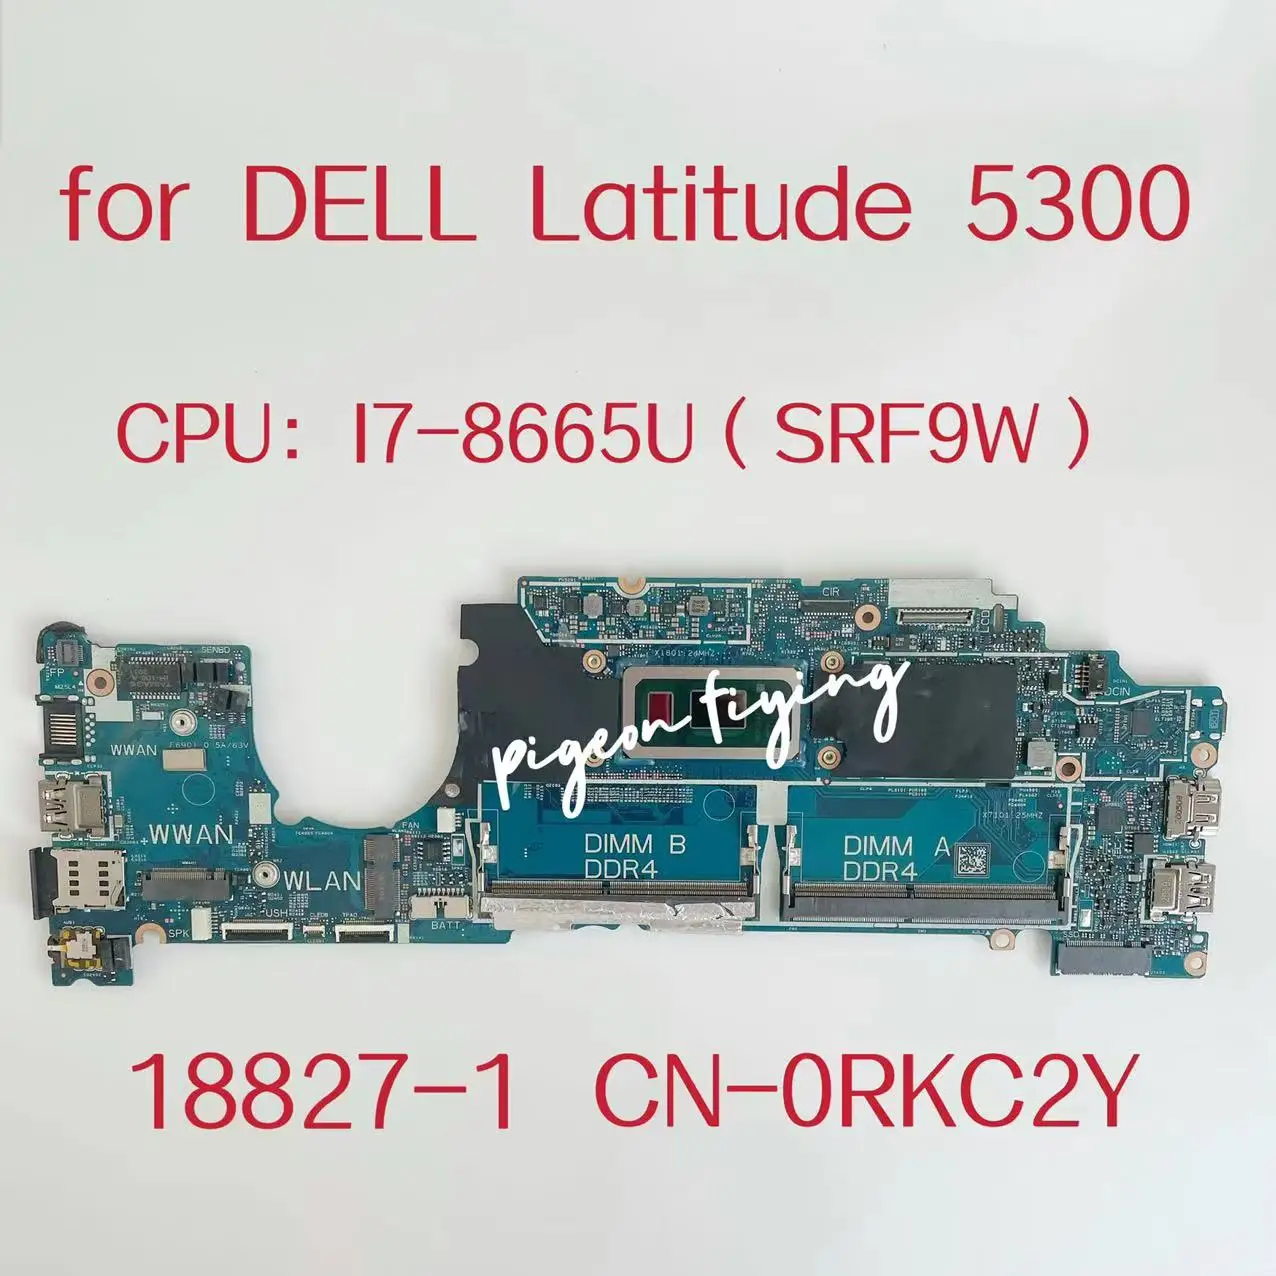 

18827-1 Mainboard For Dell Latitude 5300 Laptop Motherboard CPU:I7-8665U SRF9W DDR4 CN-0RKC2Y 0RKC2Y RKC2Y Test OK